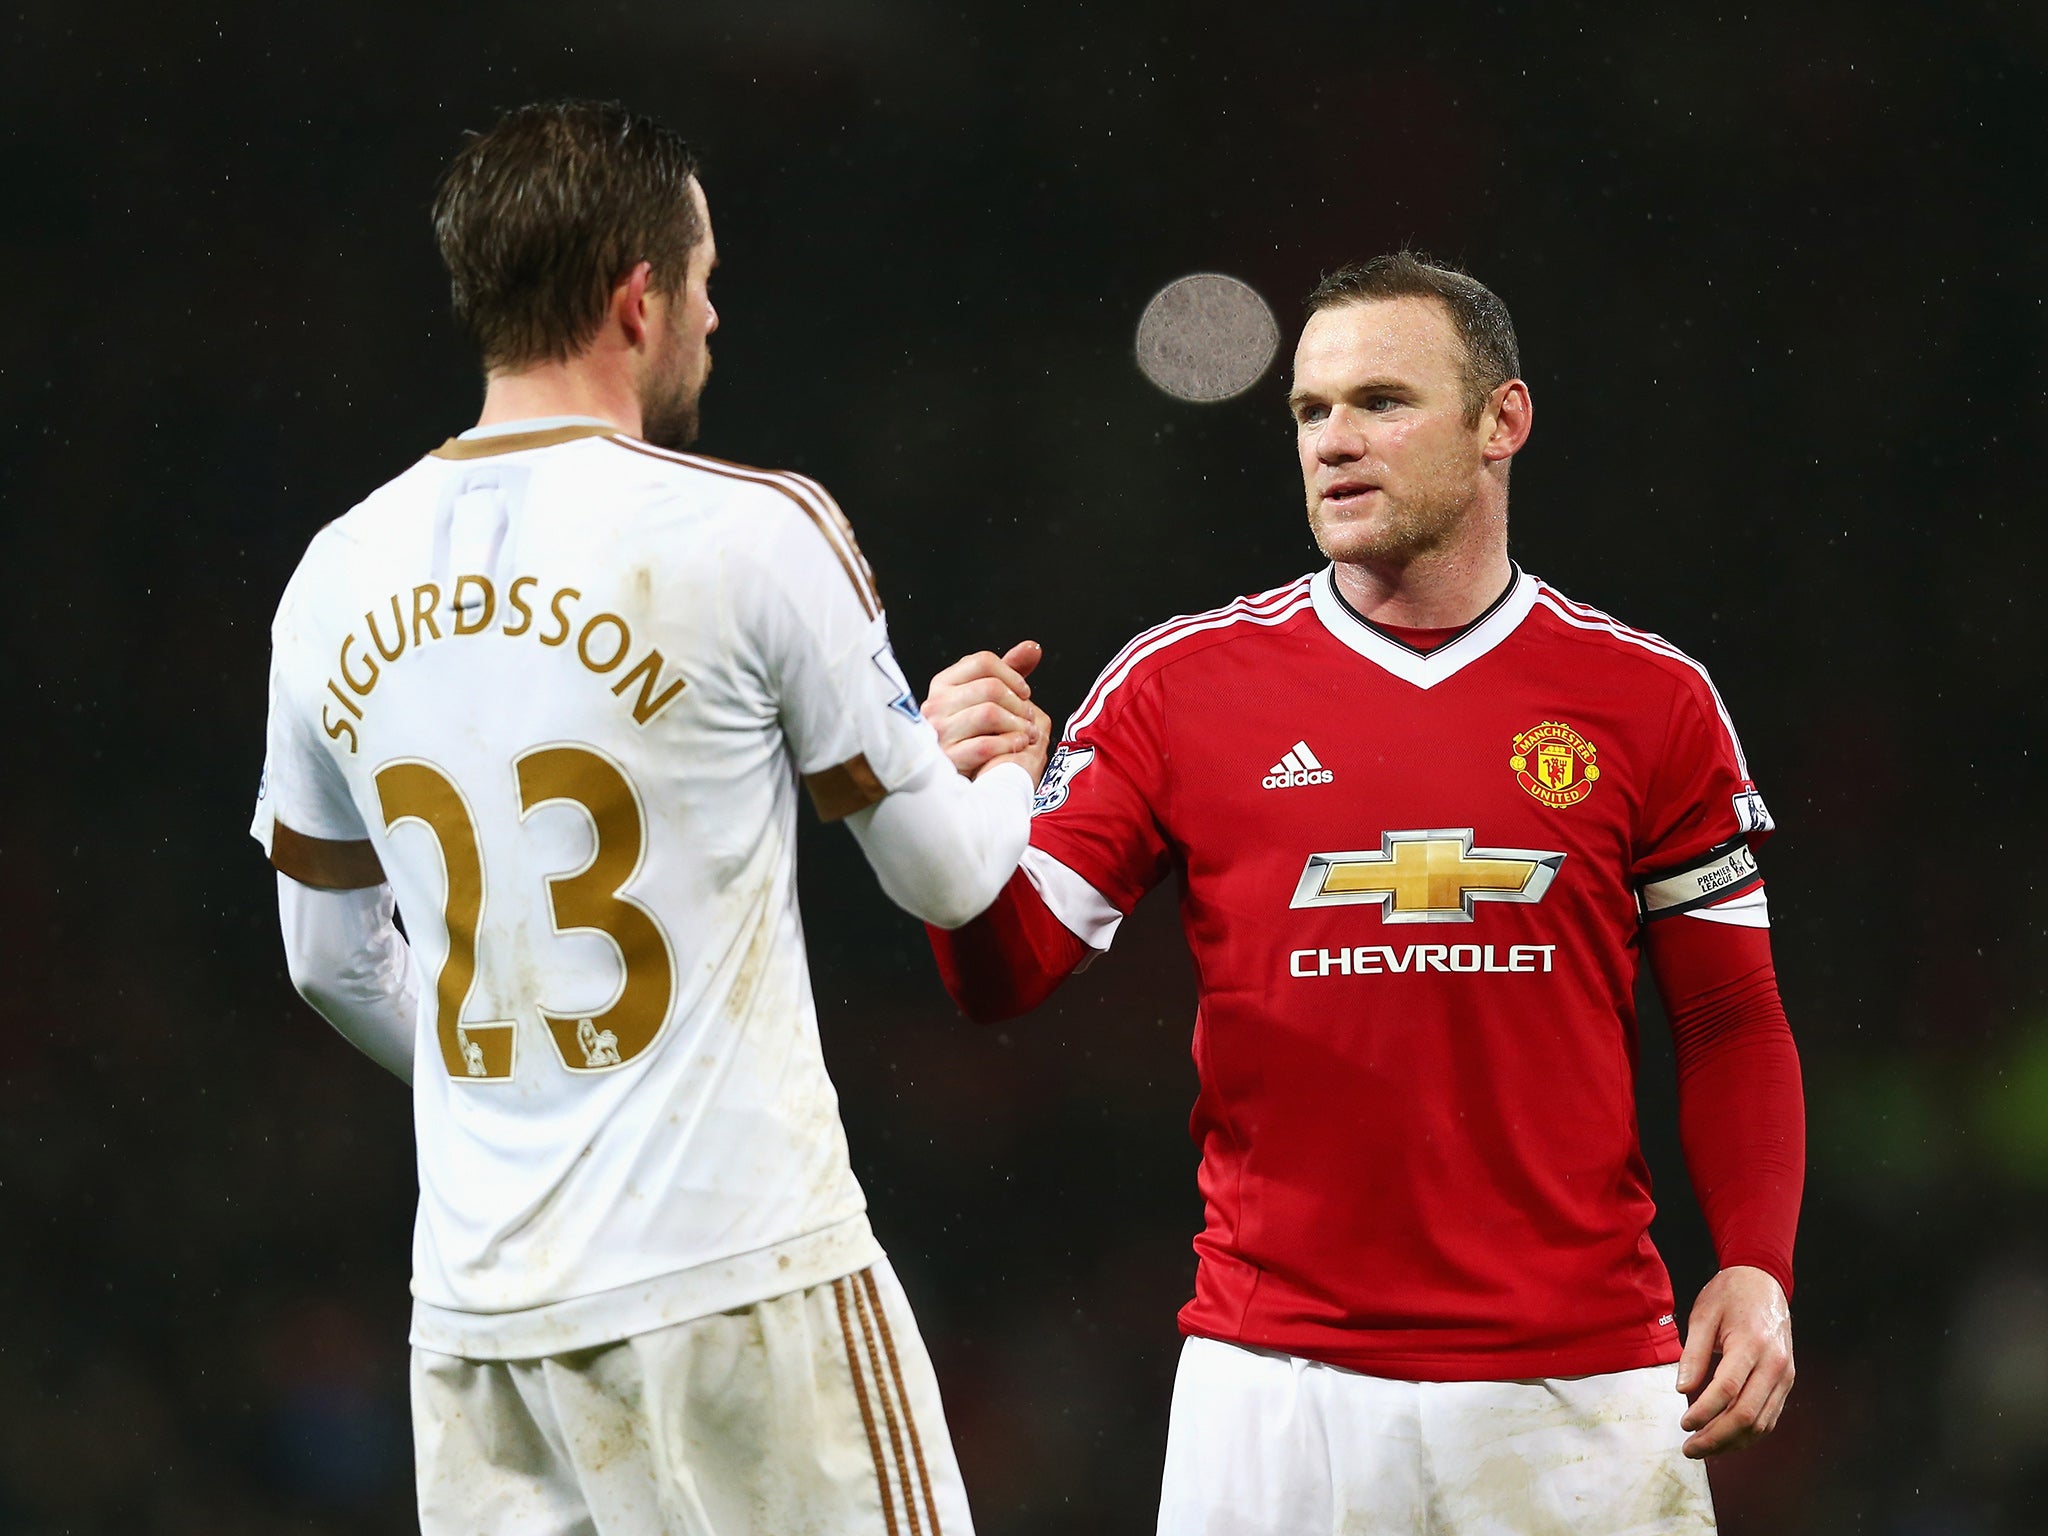 Gylfi Sigurdsson and Wayne Rooney congratulate each other after the narrow win for the home side